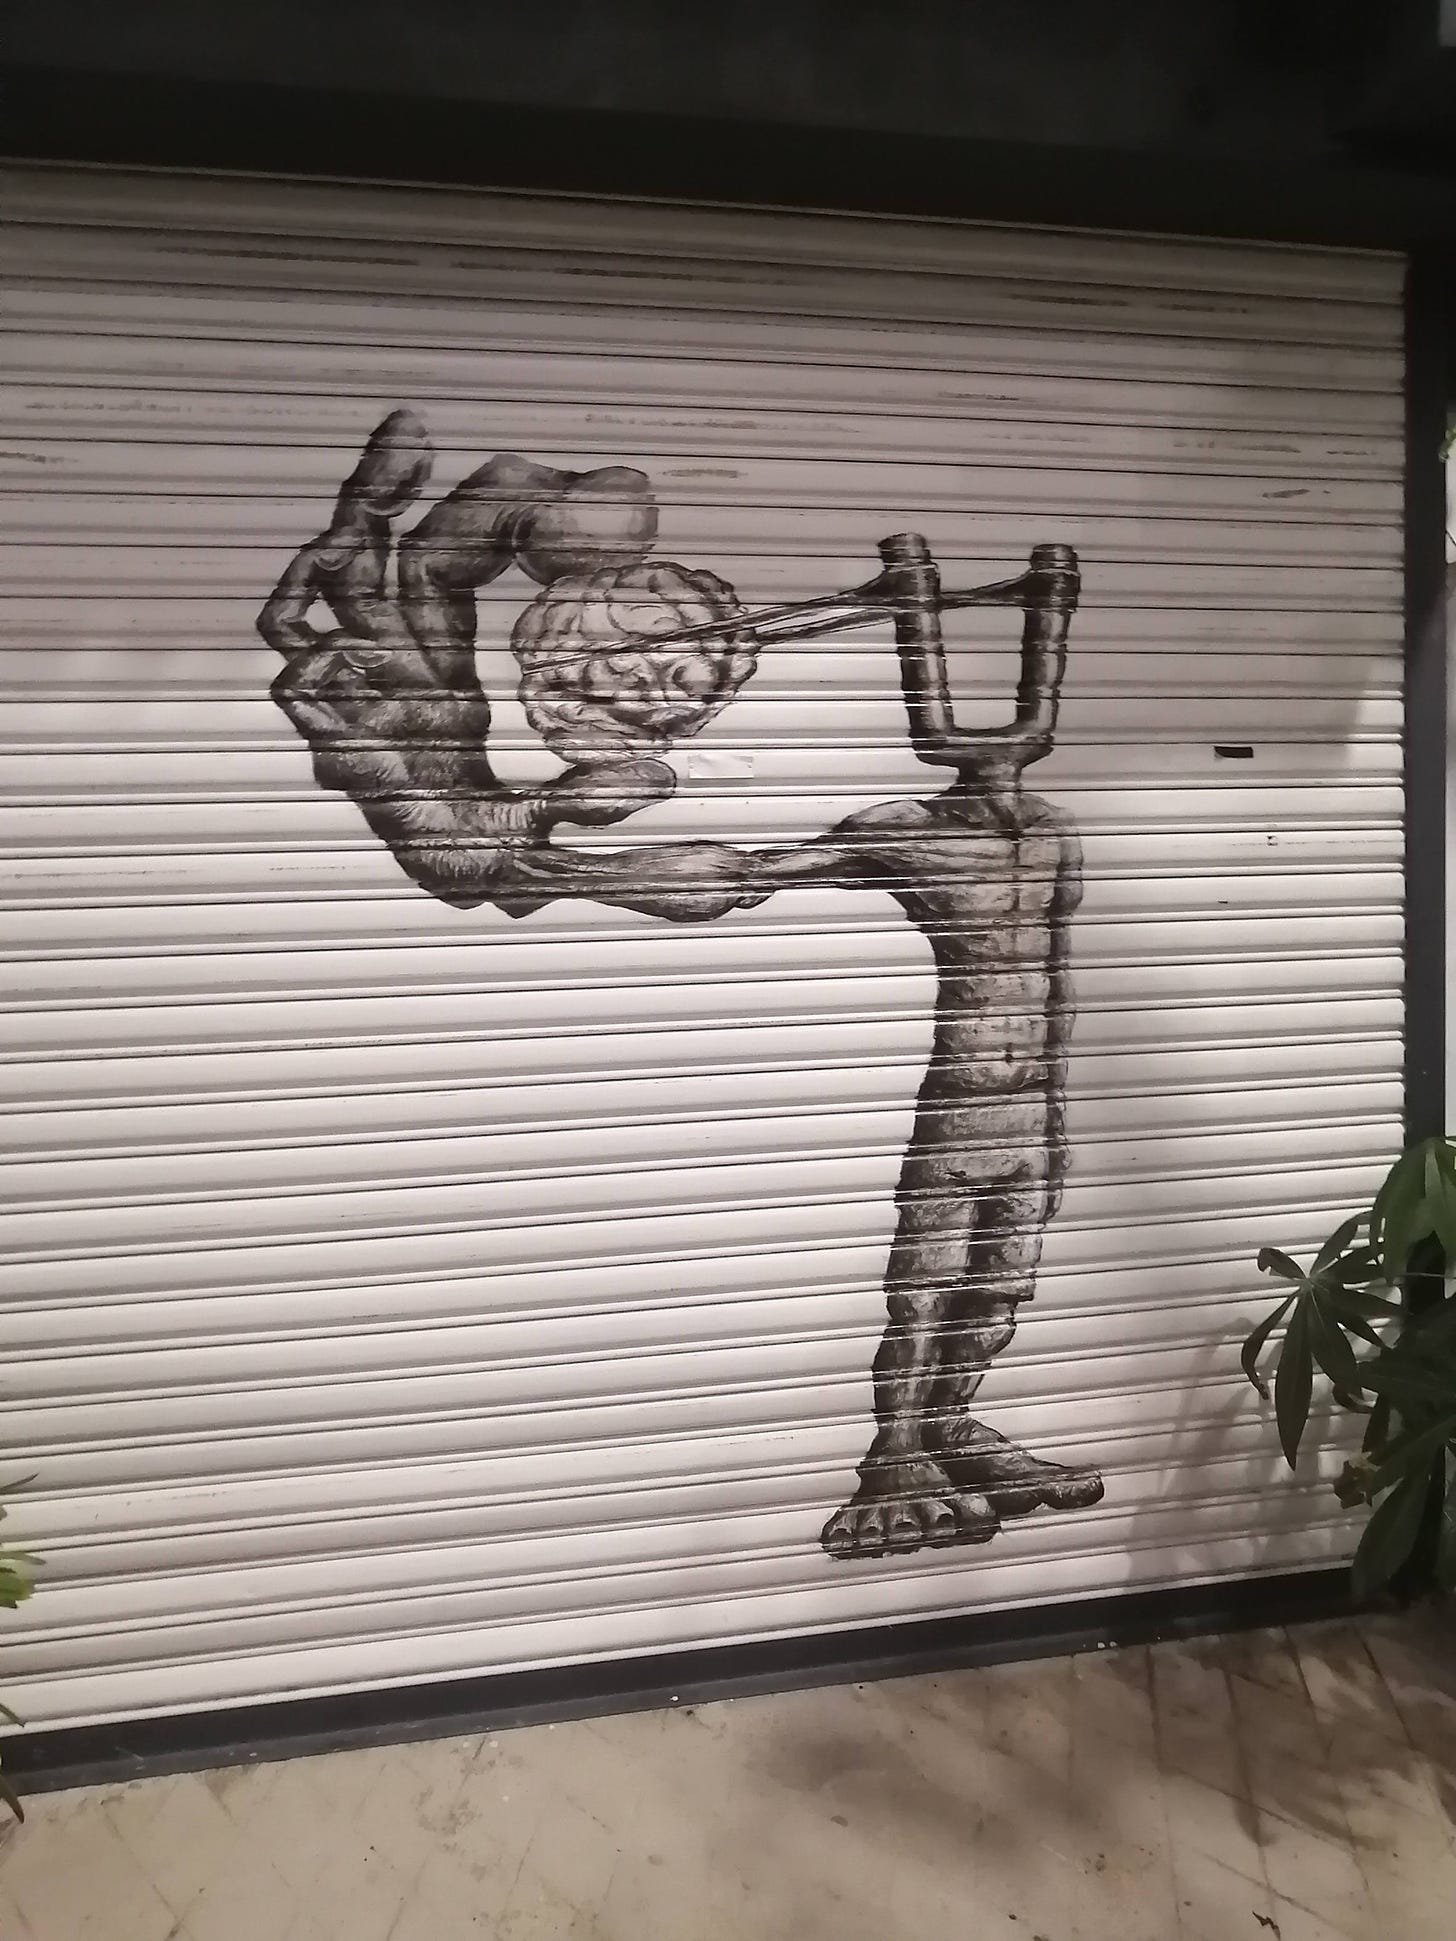 Graffiti of a man. His head is a catapult, and he is pulling his brain with his own hand in the rubber band of the catapult.